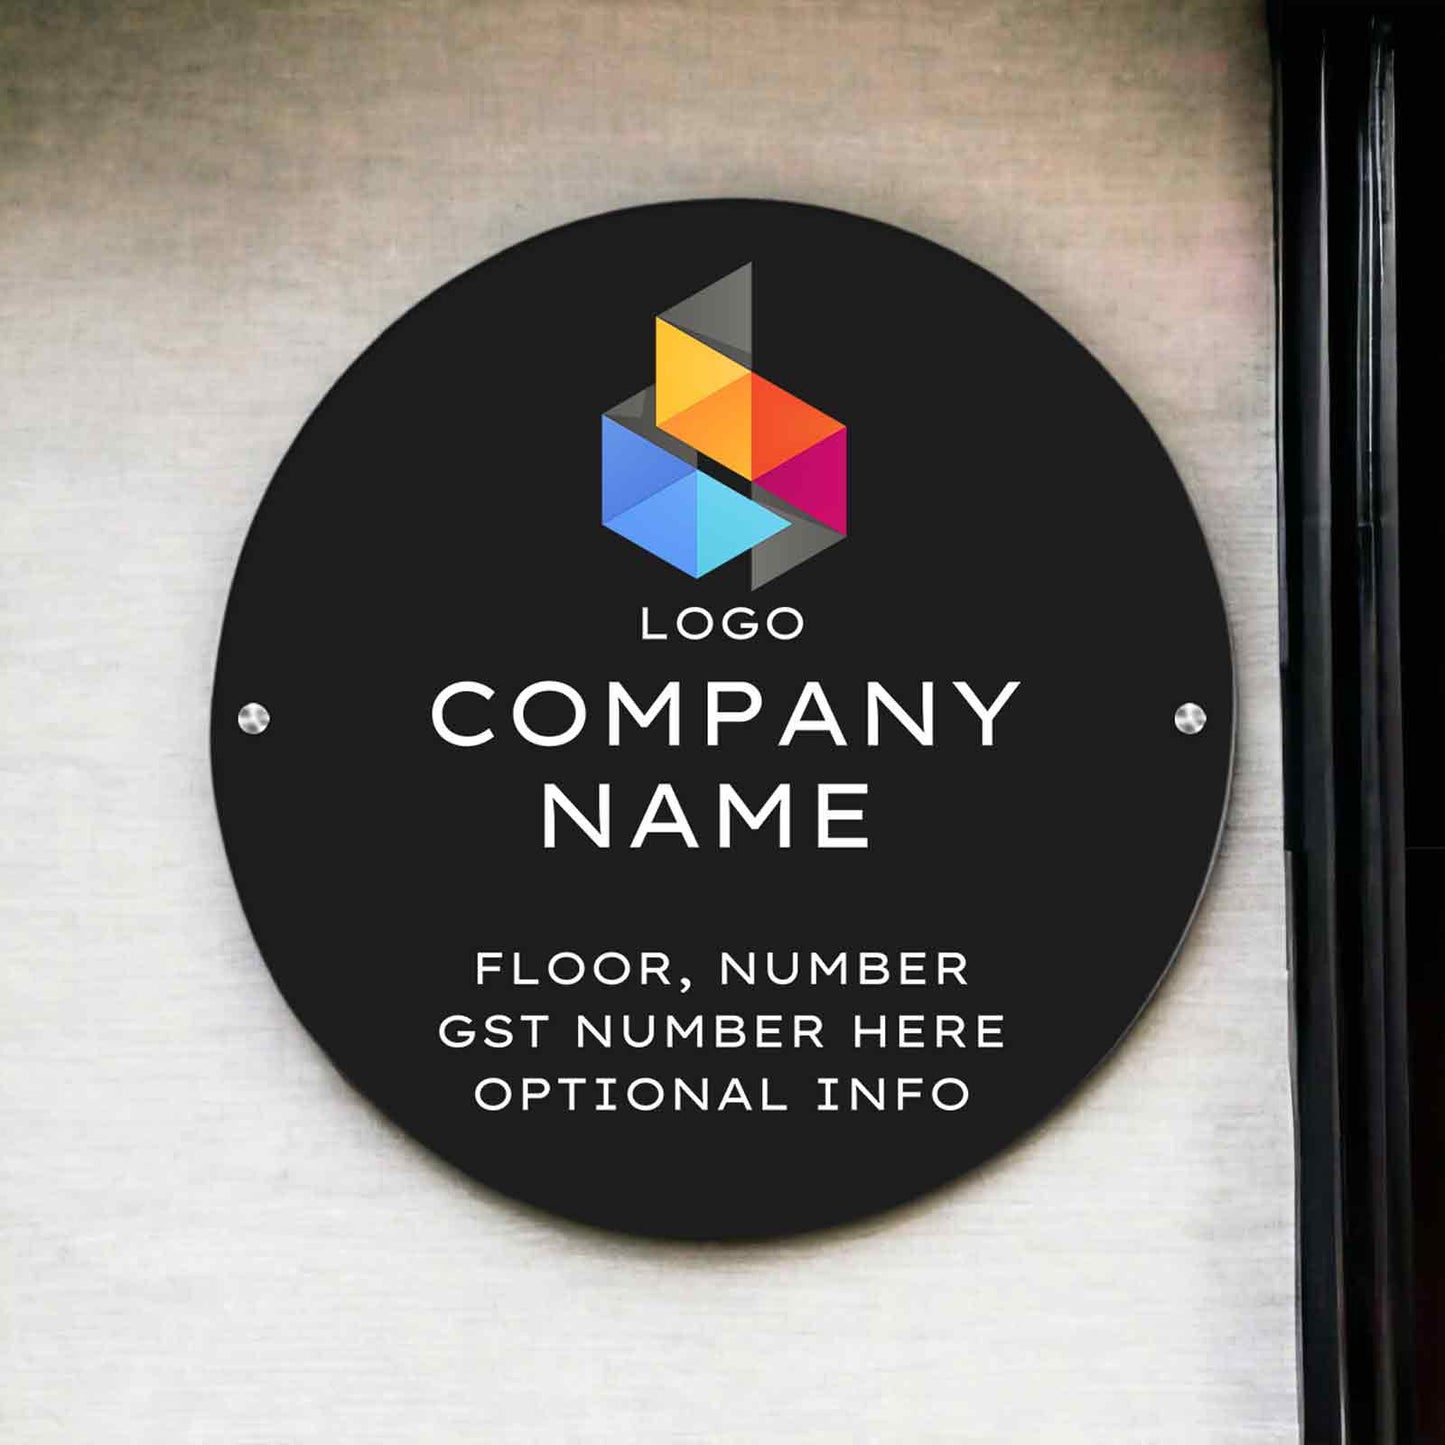 Company Name Board Office Nameplate Round